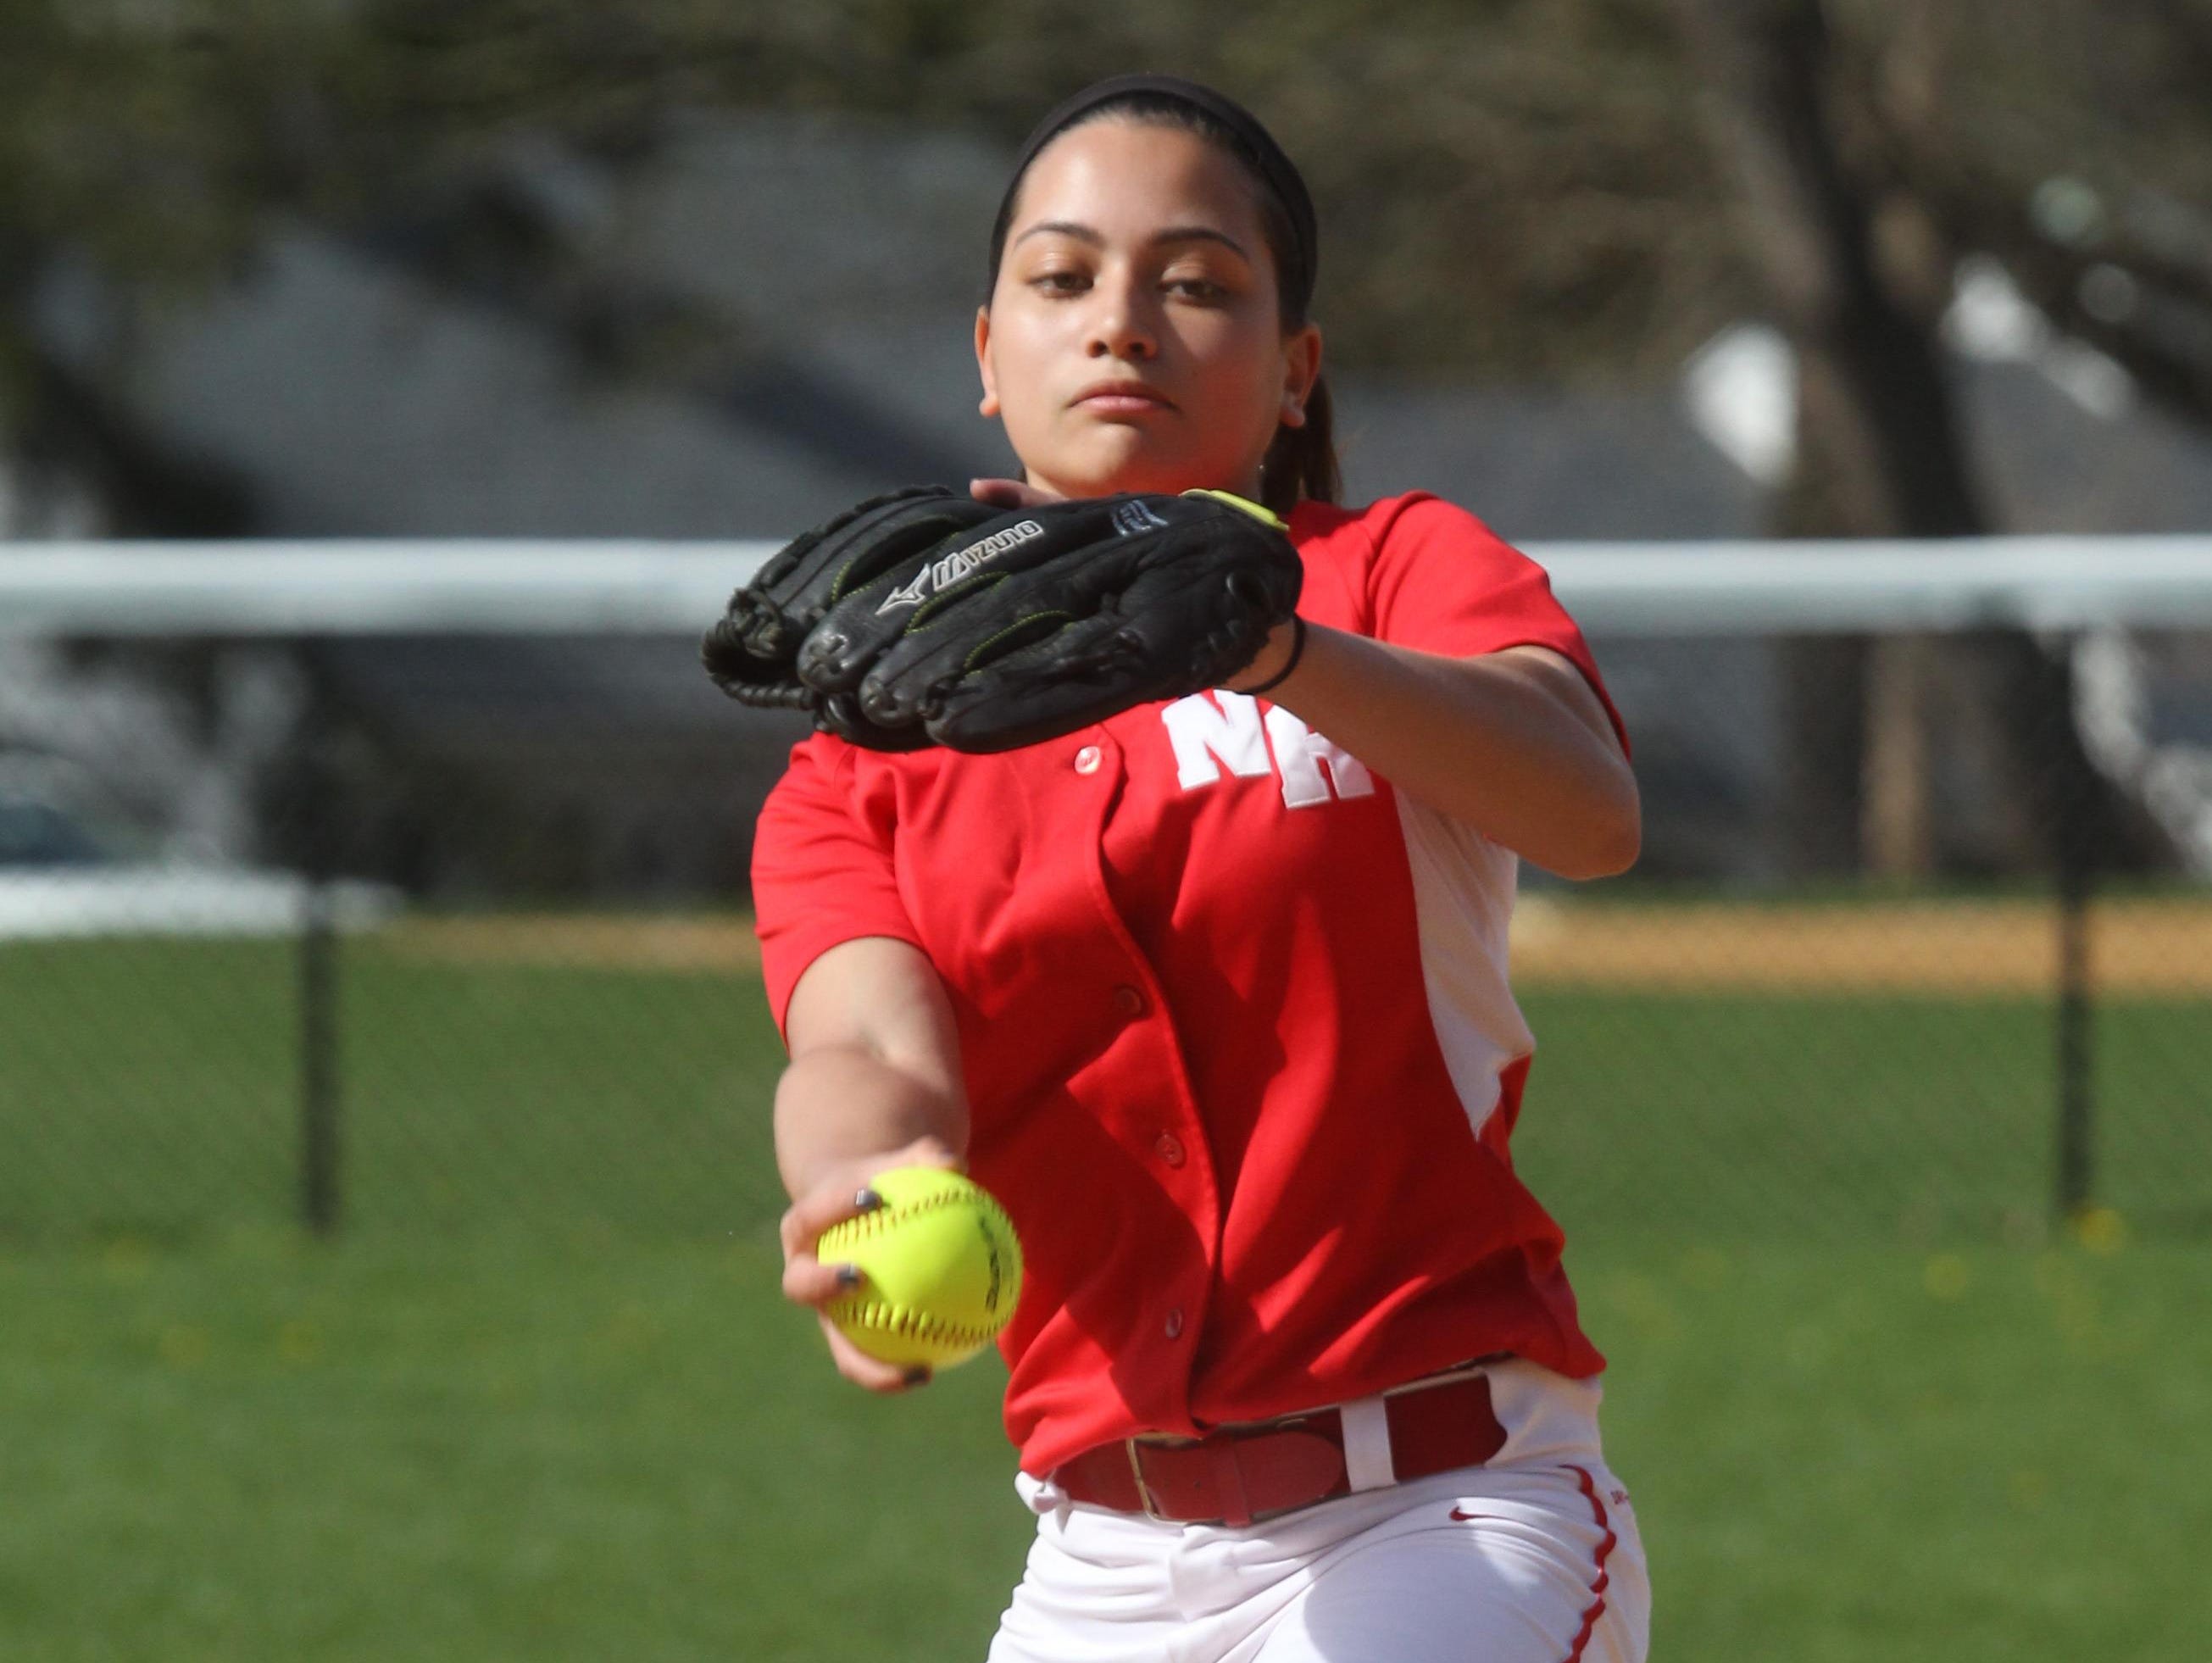 North Rockland pitcher Kayla McDermott during a game at Suffern April 28, 2015.